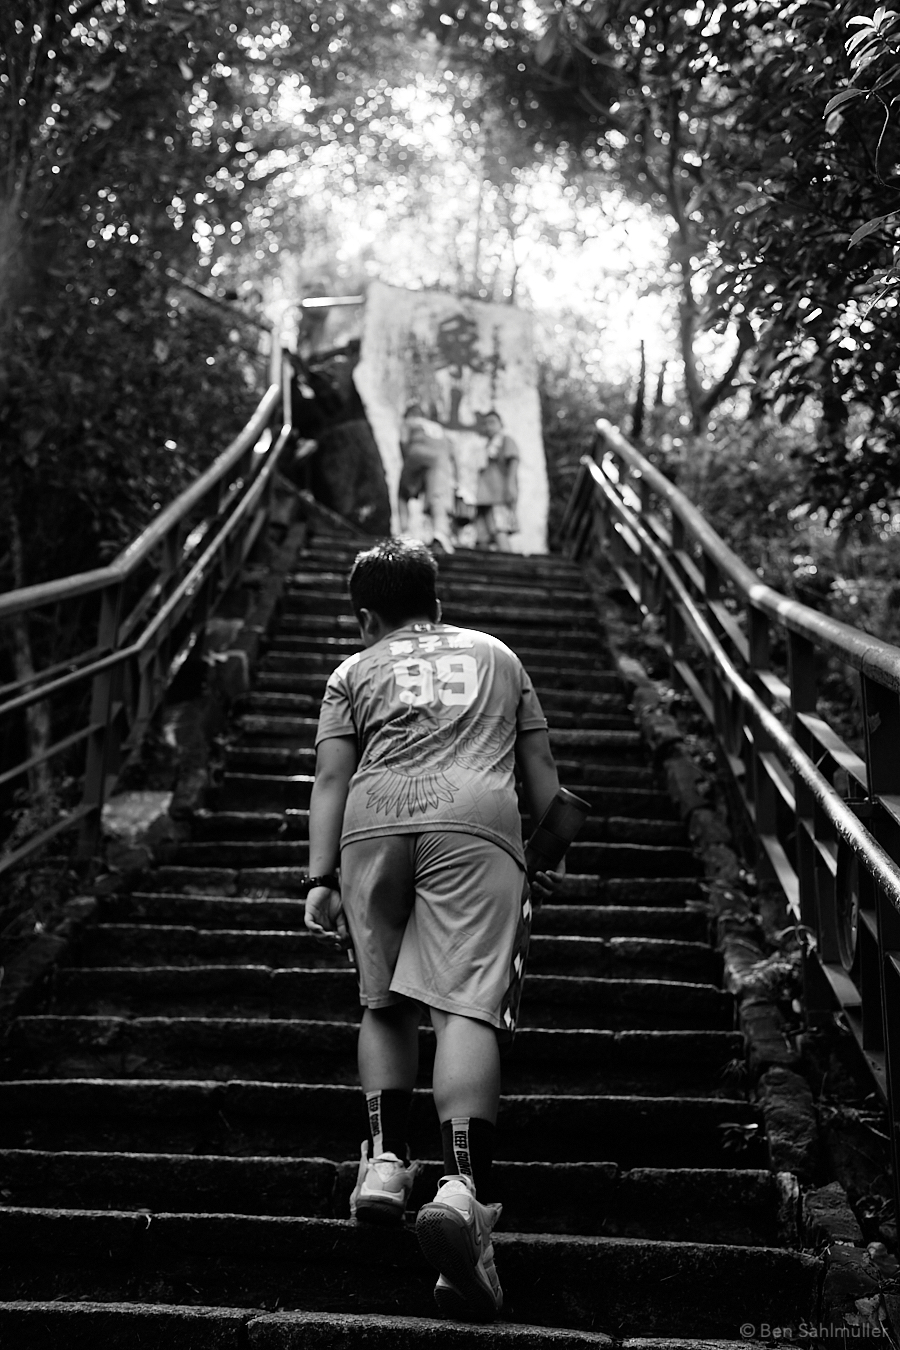 An exhausted boy stepping up the stairs towards Elephant Mountain, his friends in the background waiting for him.